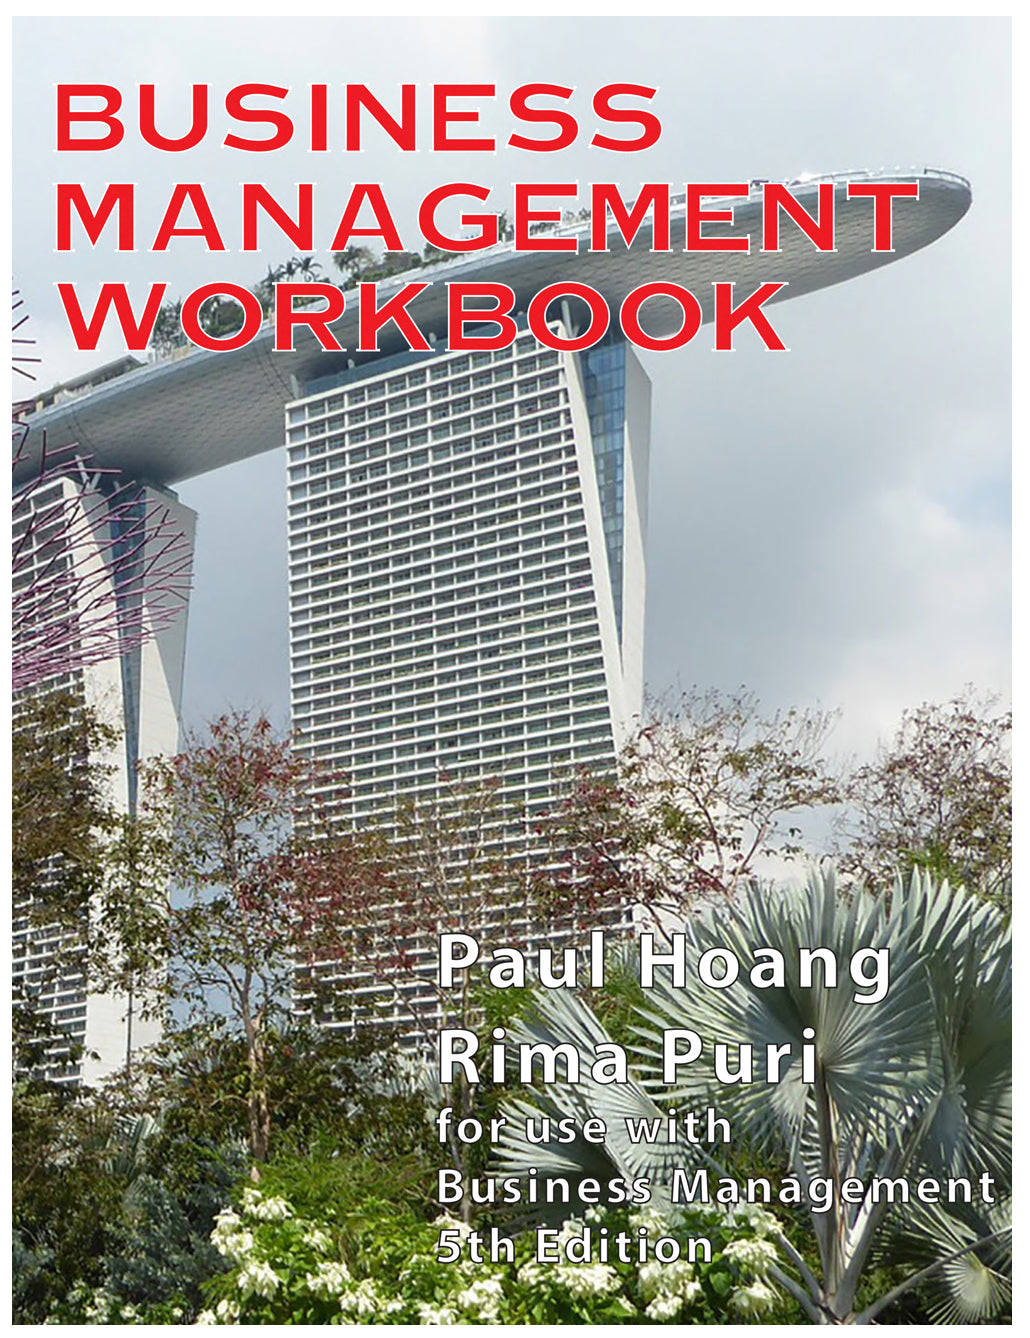 Business Management Workbook for 5th Edition